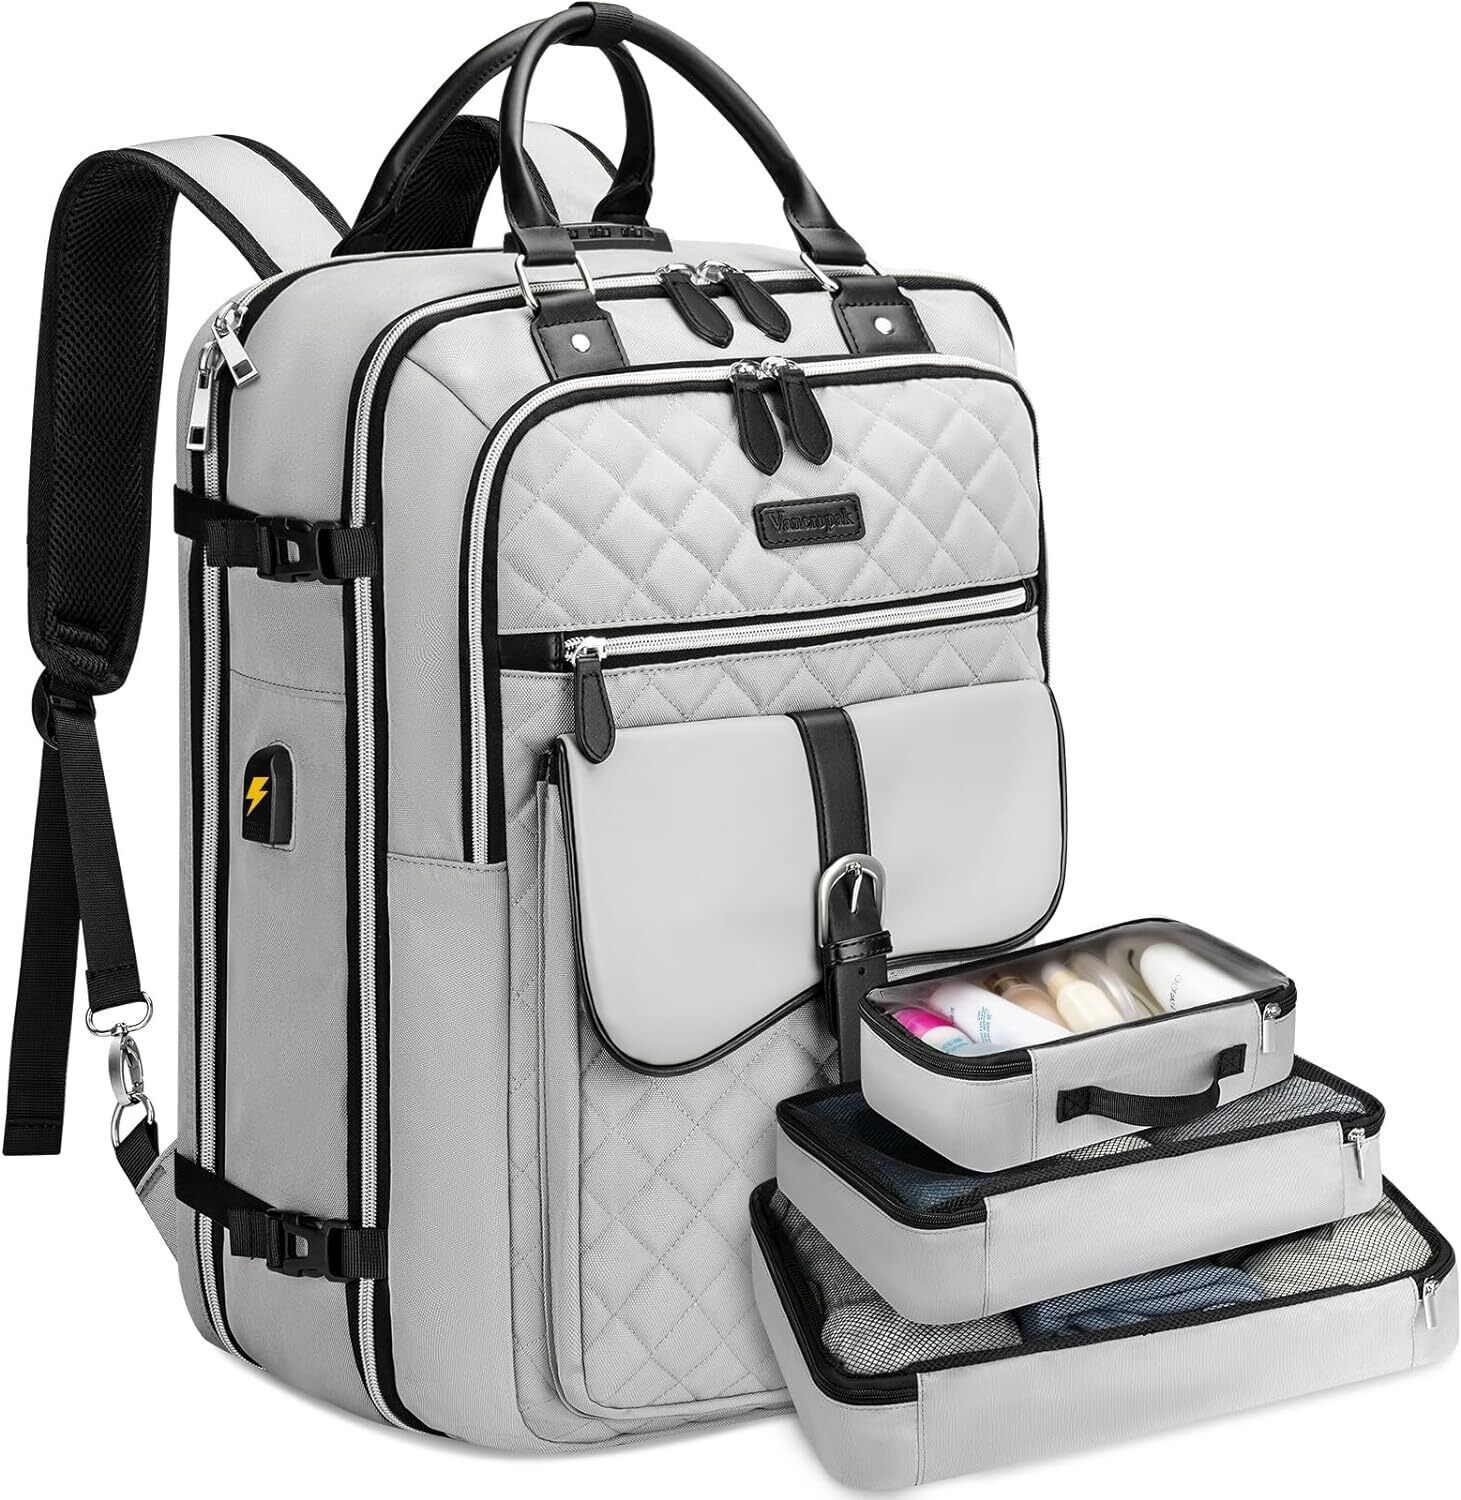 Vancropak Travel Backpack for Women, Anti Theft Laptop Carry on Grey 